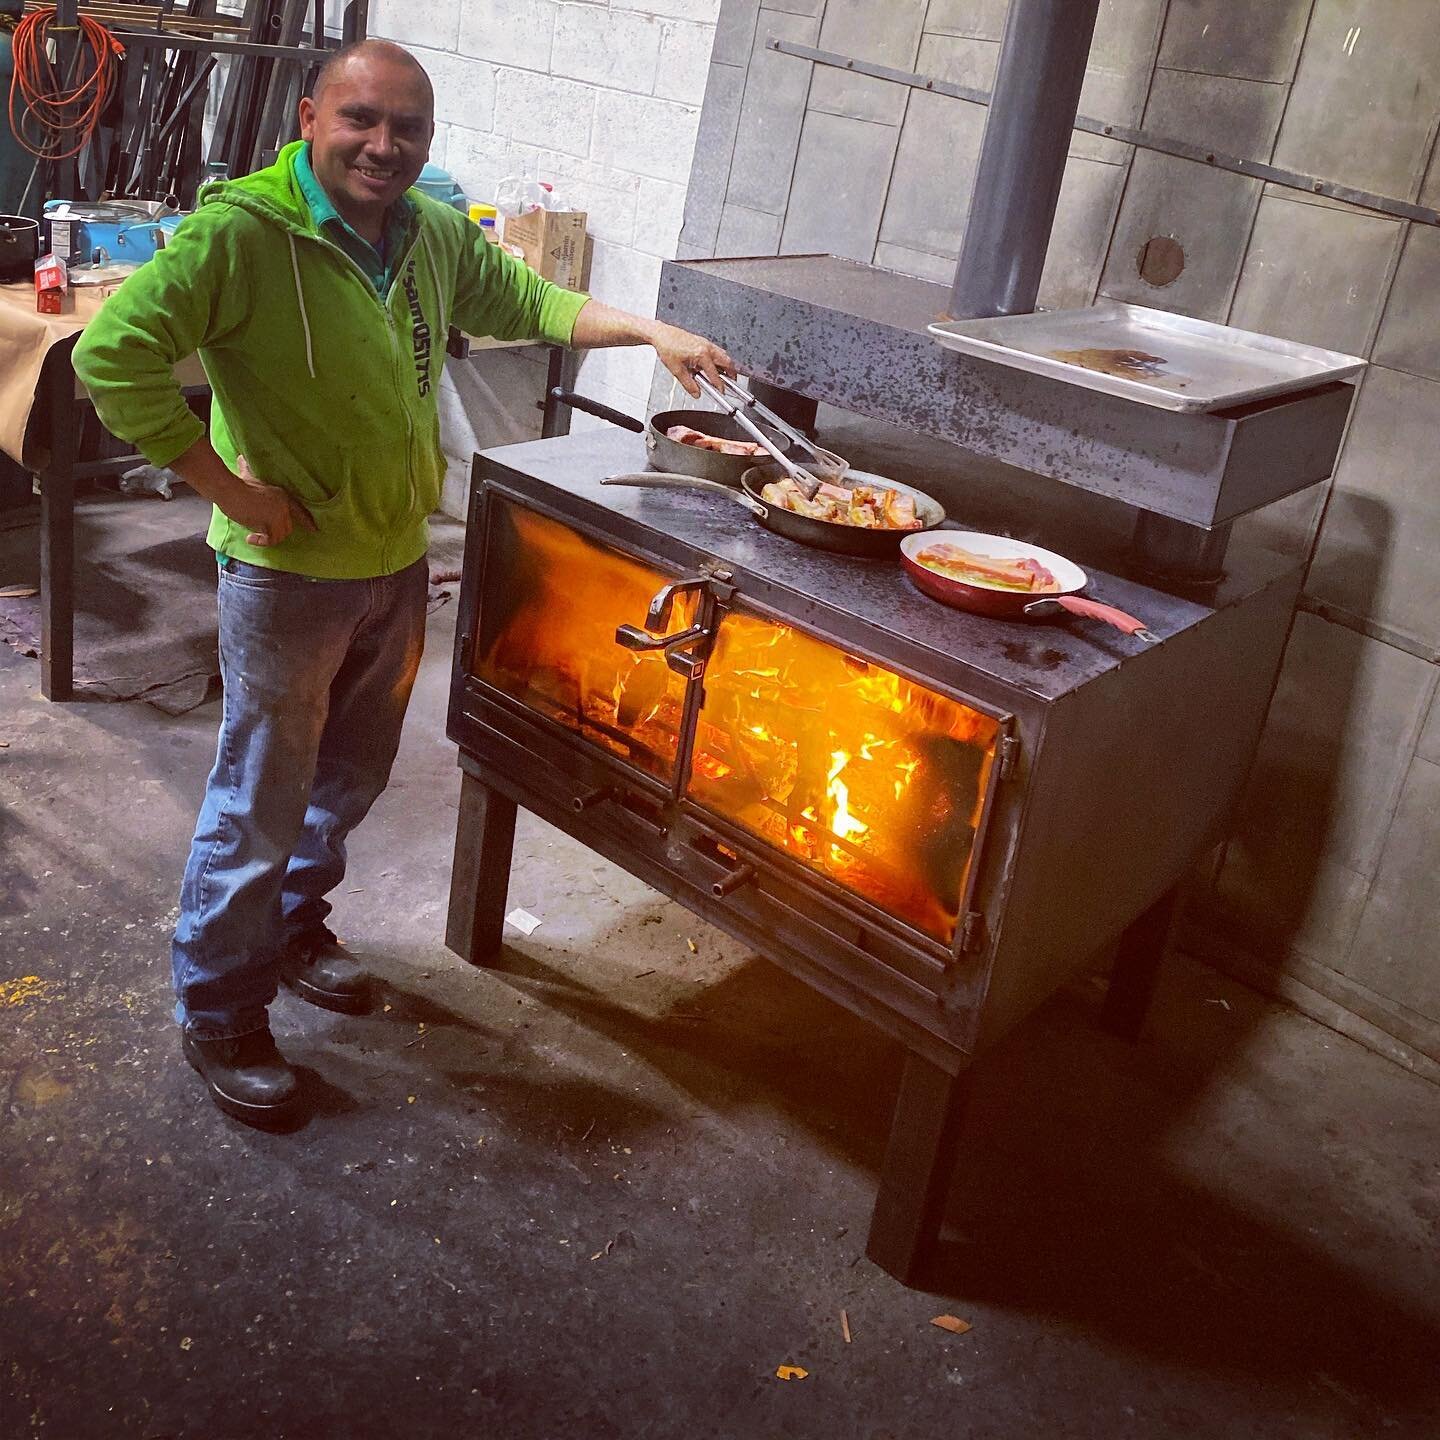 New fall weather means new wood stove at AWM. Including a cooktop for Shorty could possibly be the best idea we&rsquo;ve ever had... 🌮🍗🌶 #lunchisserved